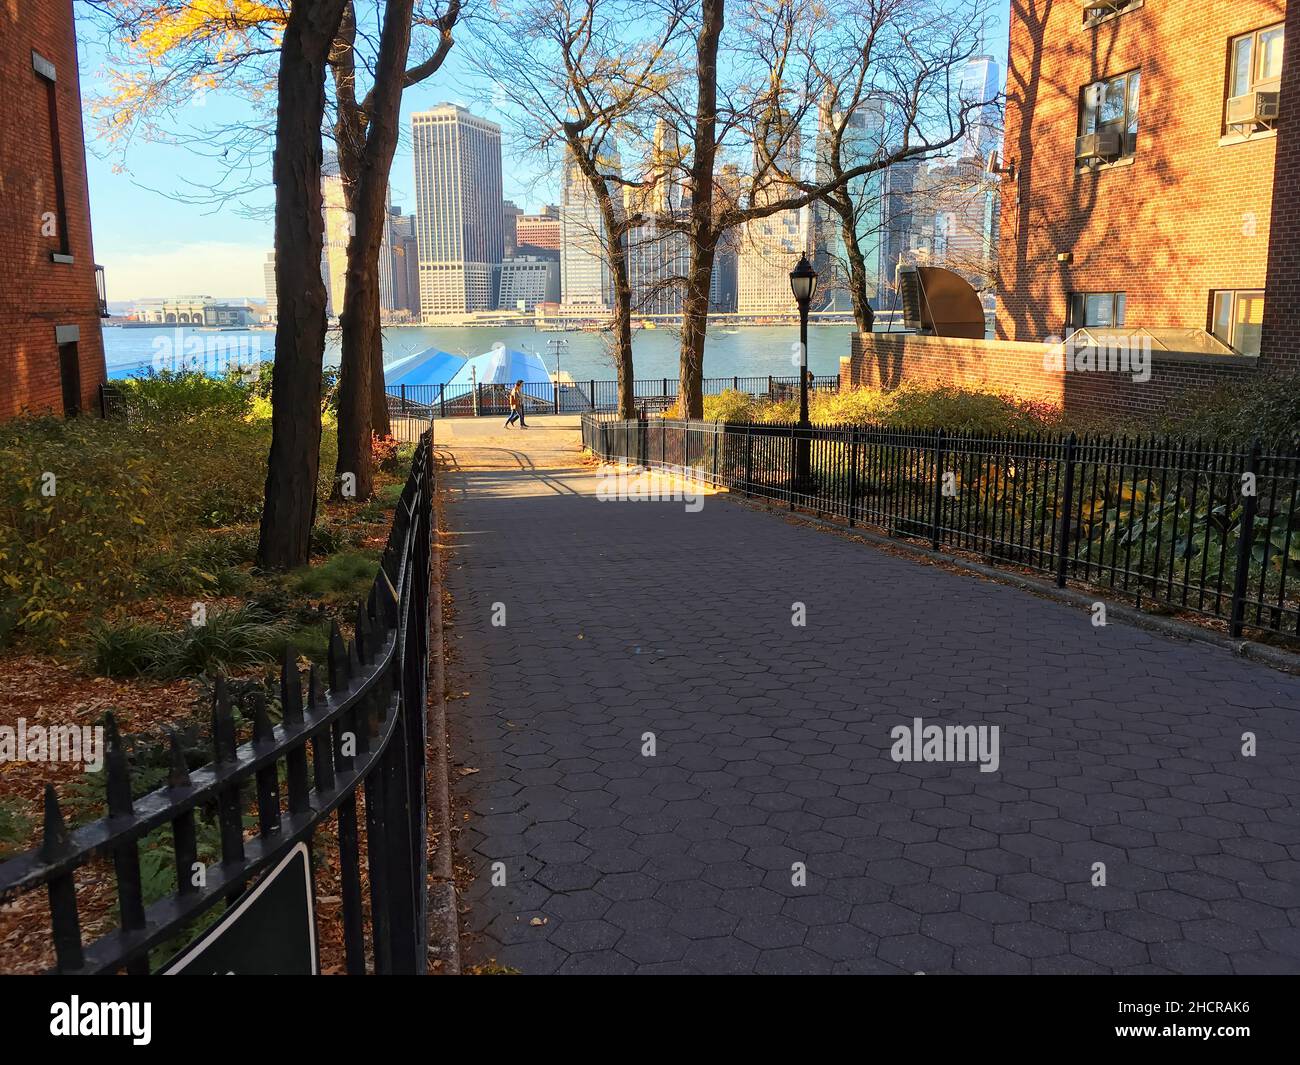 Brooklyn, NY, USA - Dec 31, 2022: Brooklyn Heights pedestrian path with view of lower Manhattan across the East River Stock Photo